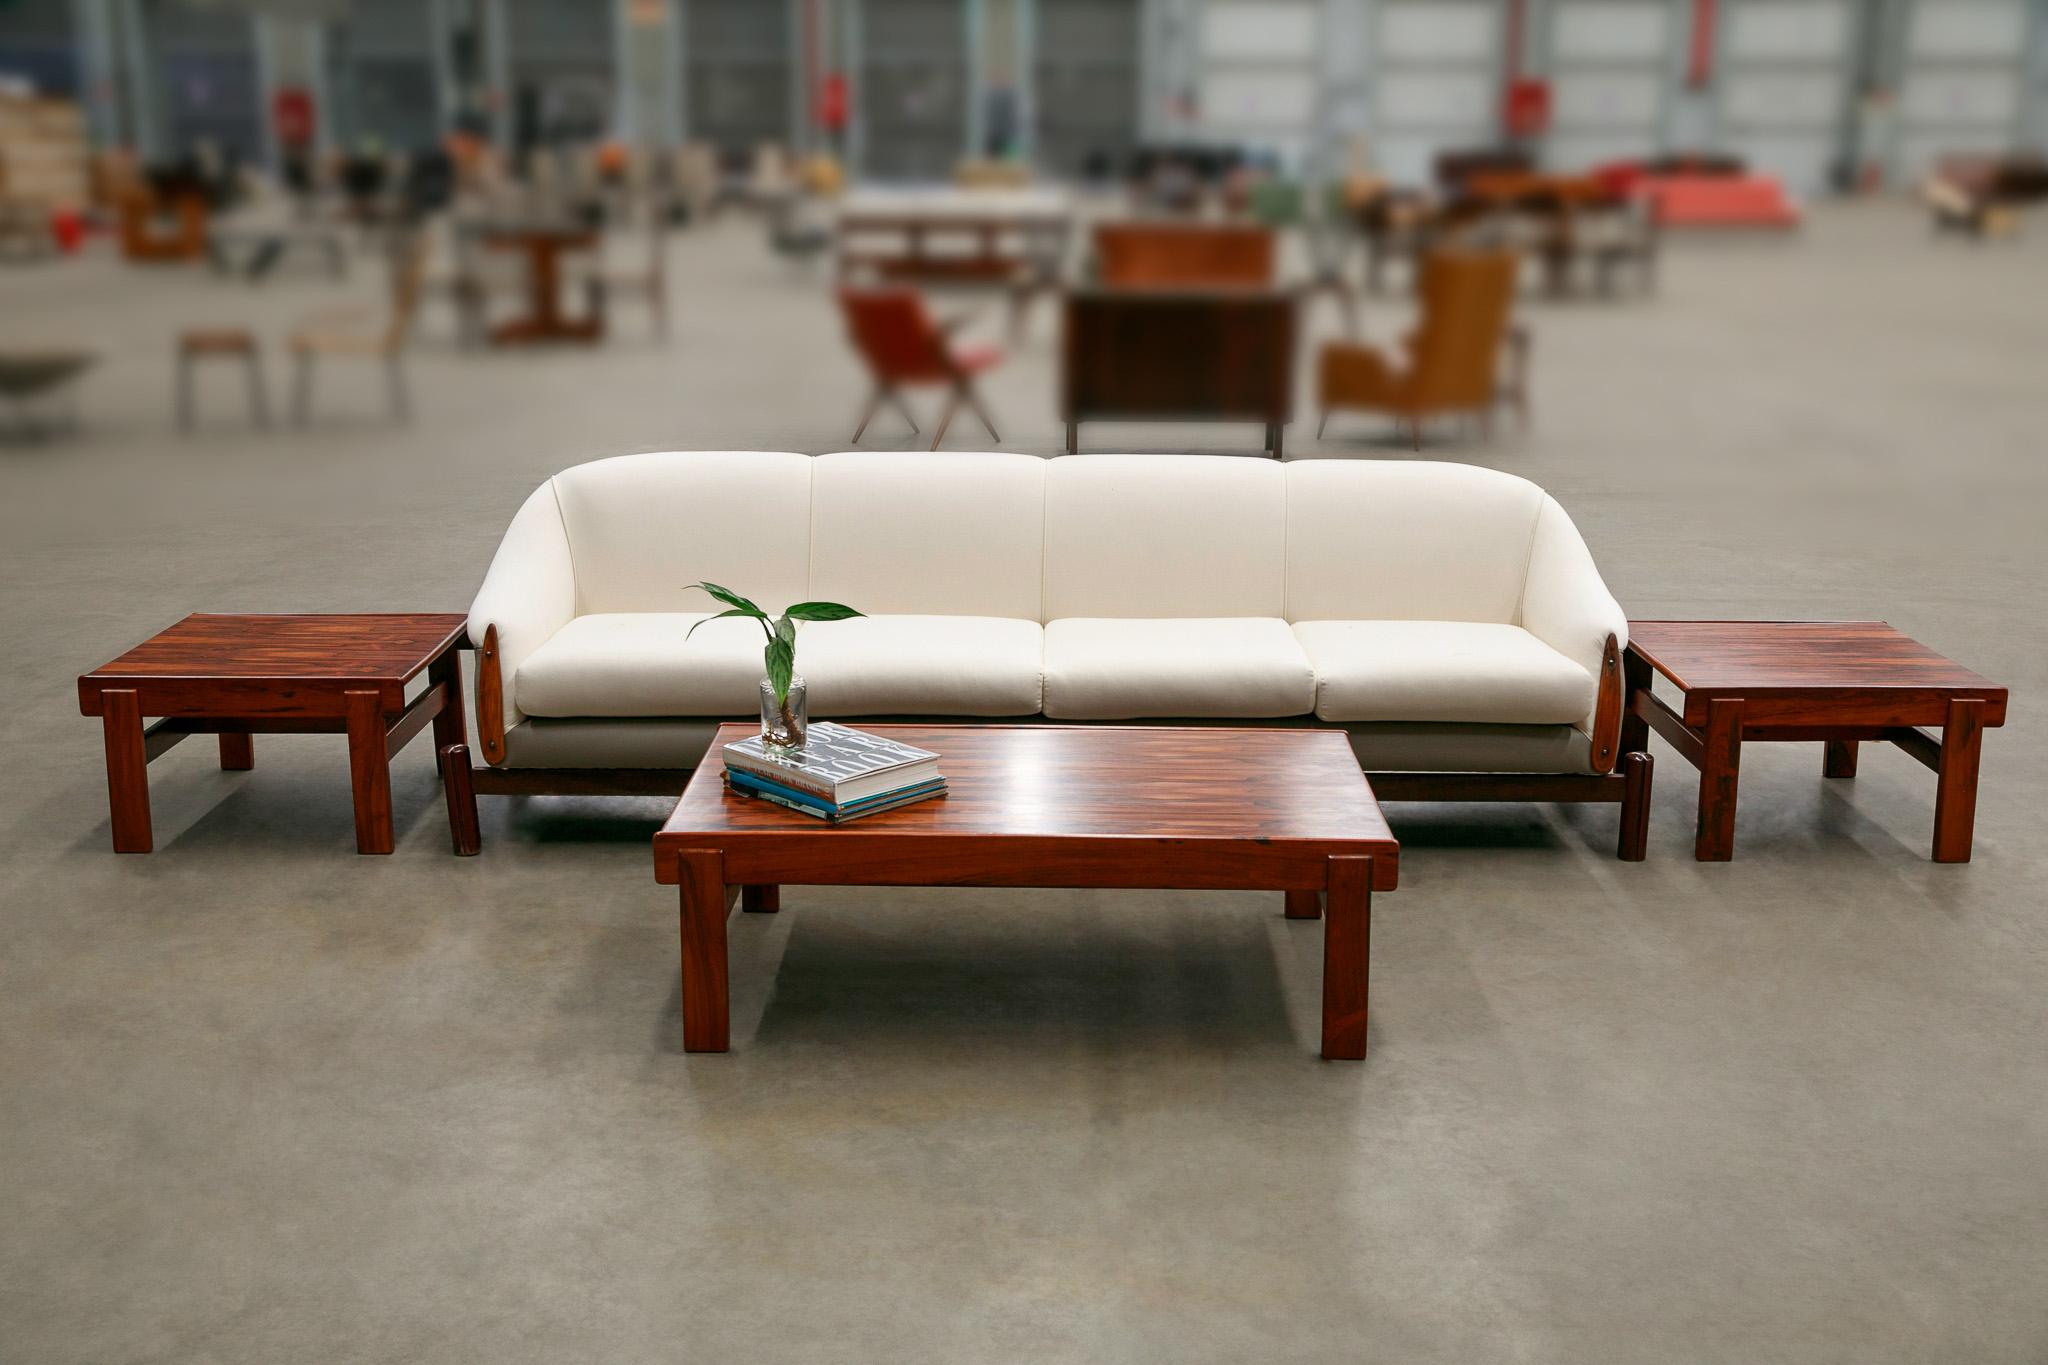 Brazilian Modern Sofa in Hardwood, Grey Leather & White Fabric by Cimo, 1960s For Sale 1